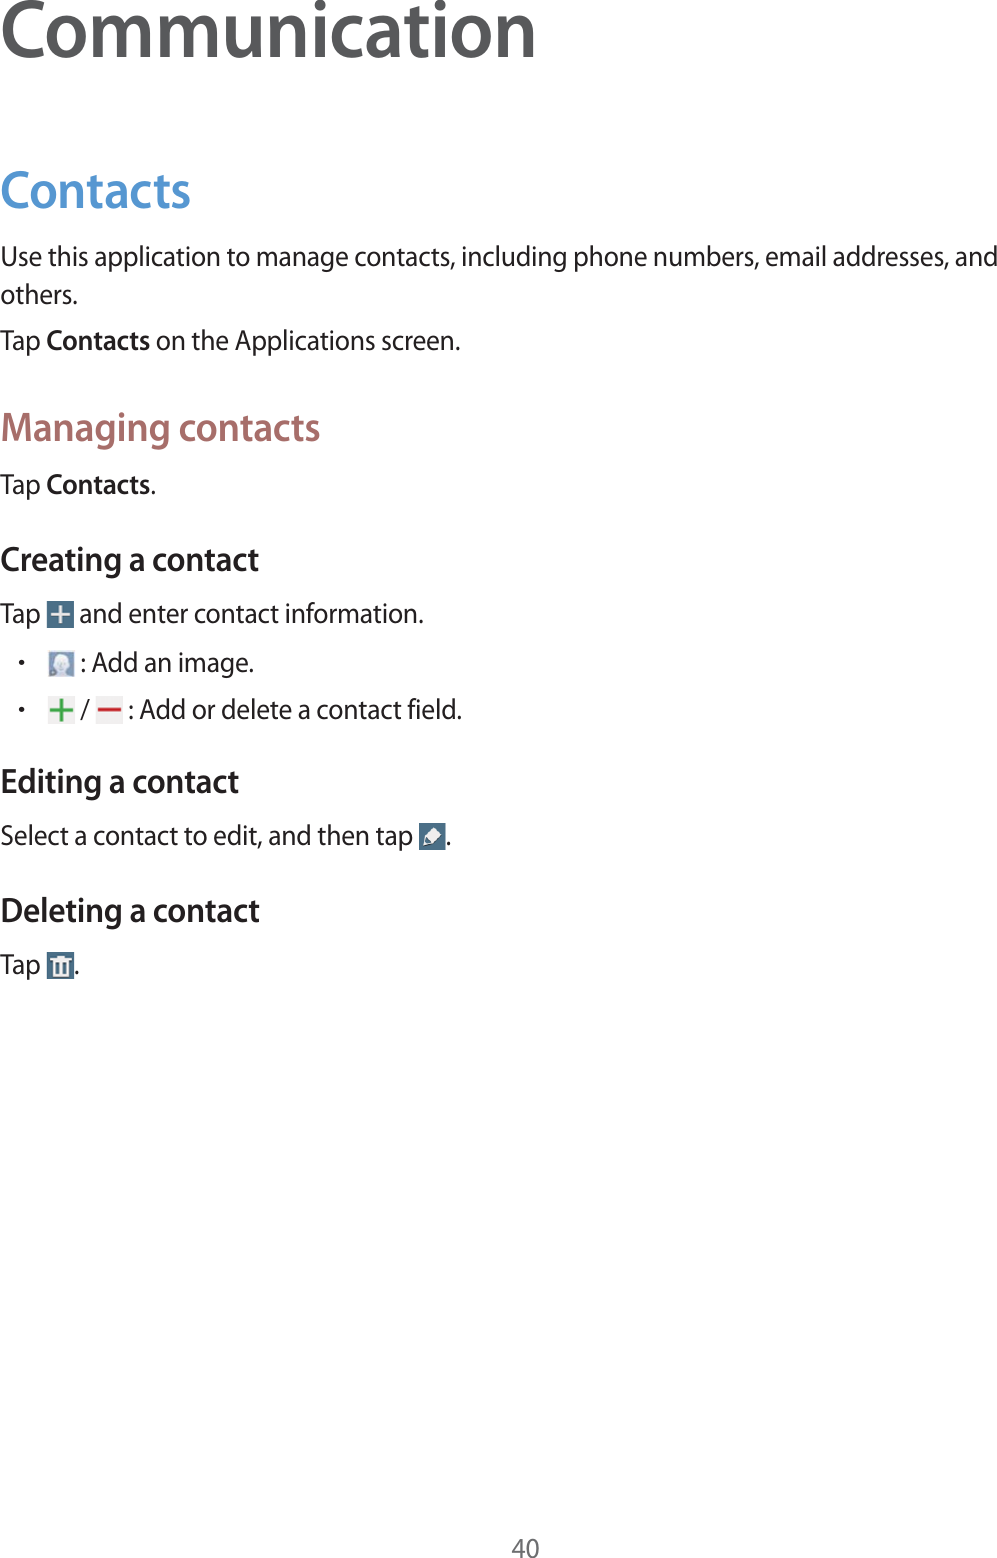 40CommunicationContactsUse this application to manage contacts, including phone numbers, email addresses, and others.Tap Contacts on the Applications screen.Managing contactsTap Contacts.Creating a contactTap   and enter contact information.r : Add an image.r /   : Add or delete a contact field.Editing a contactSelect a contact to edit, and then tap  .Deleting a contactTap  .